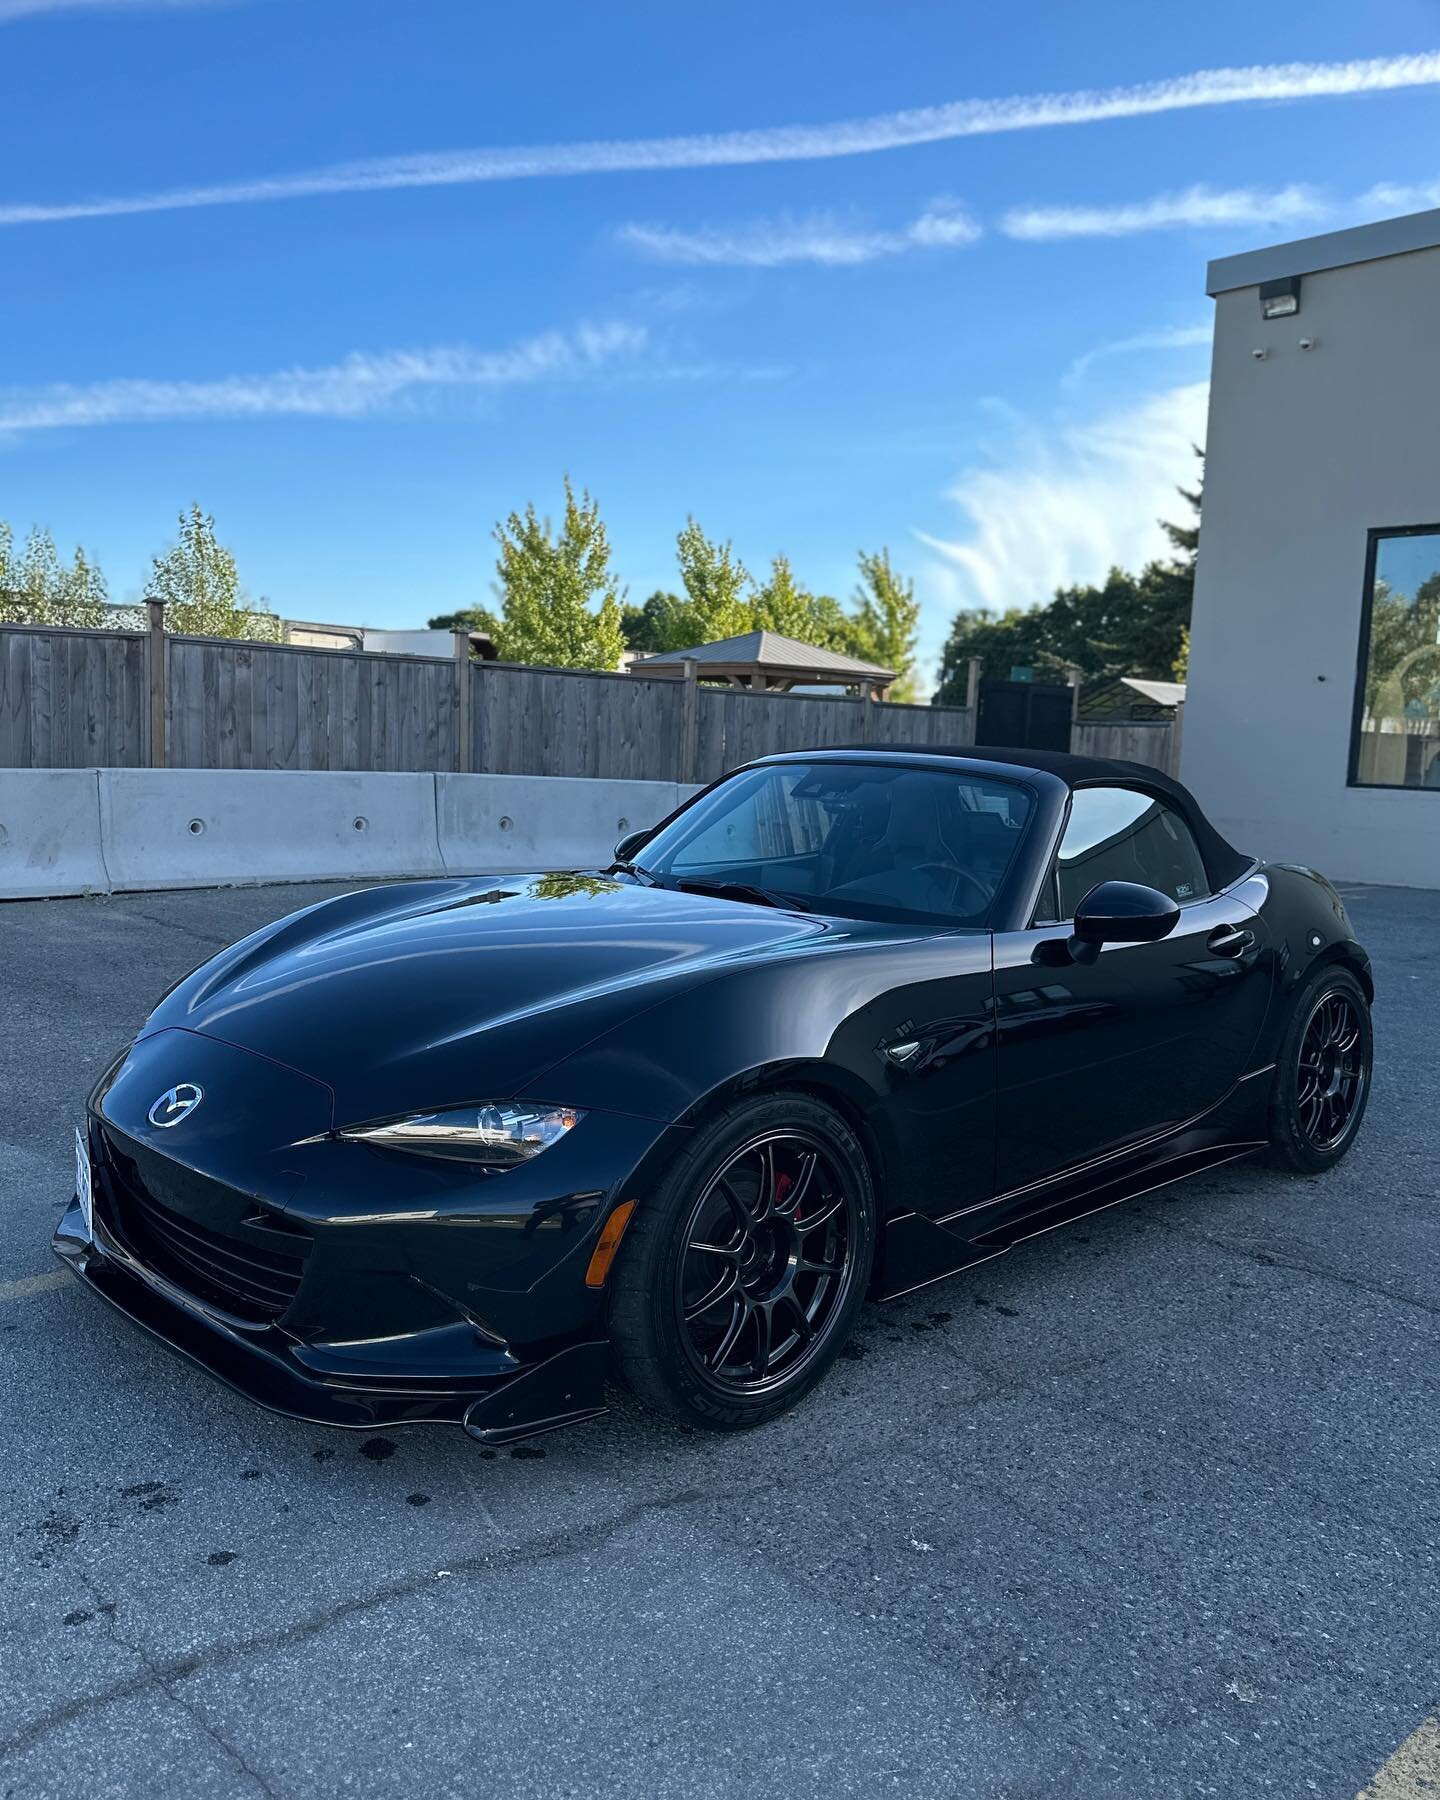 Mazda Miata ND2 

Came in for a Maintenance Washie✅

Some much needed TLC after a few track days and some weekend cruises ☺️

For inquiries or bookings

Phone: 604-404-7225
Email: Washiewashiedetailing@gmail.com
Website: Washiewashie.ca